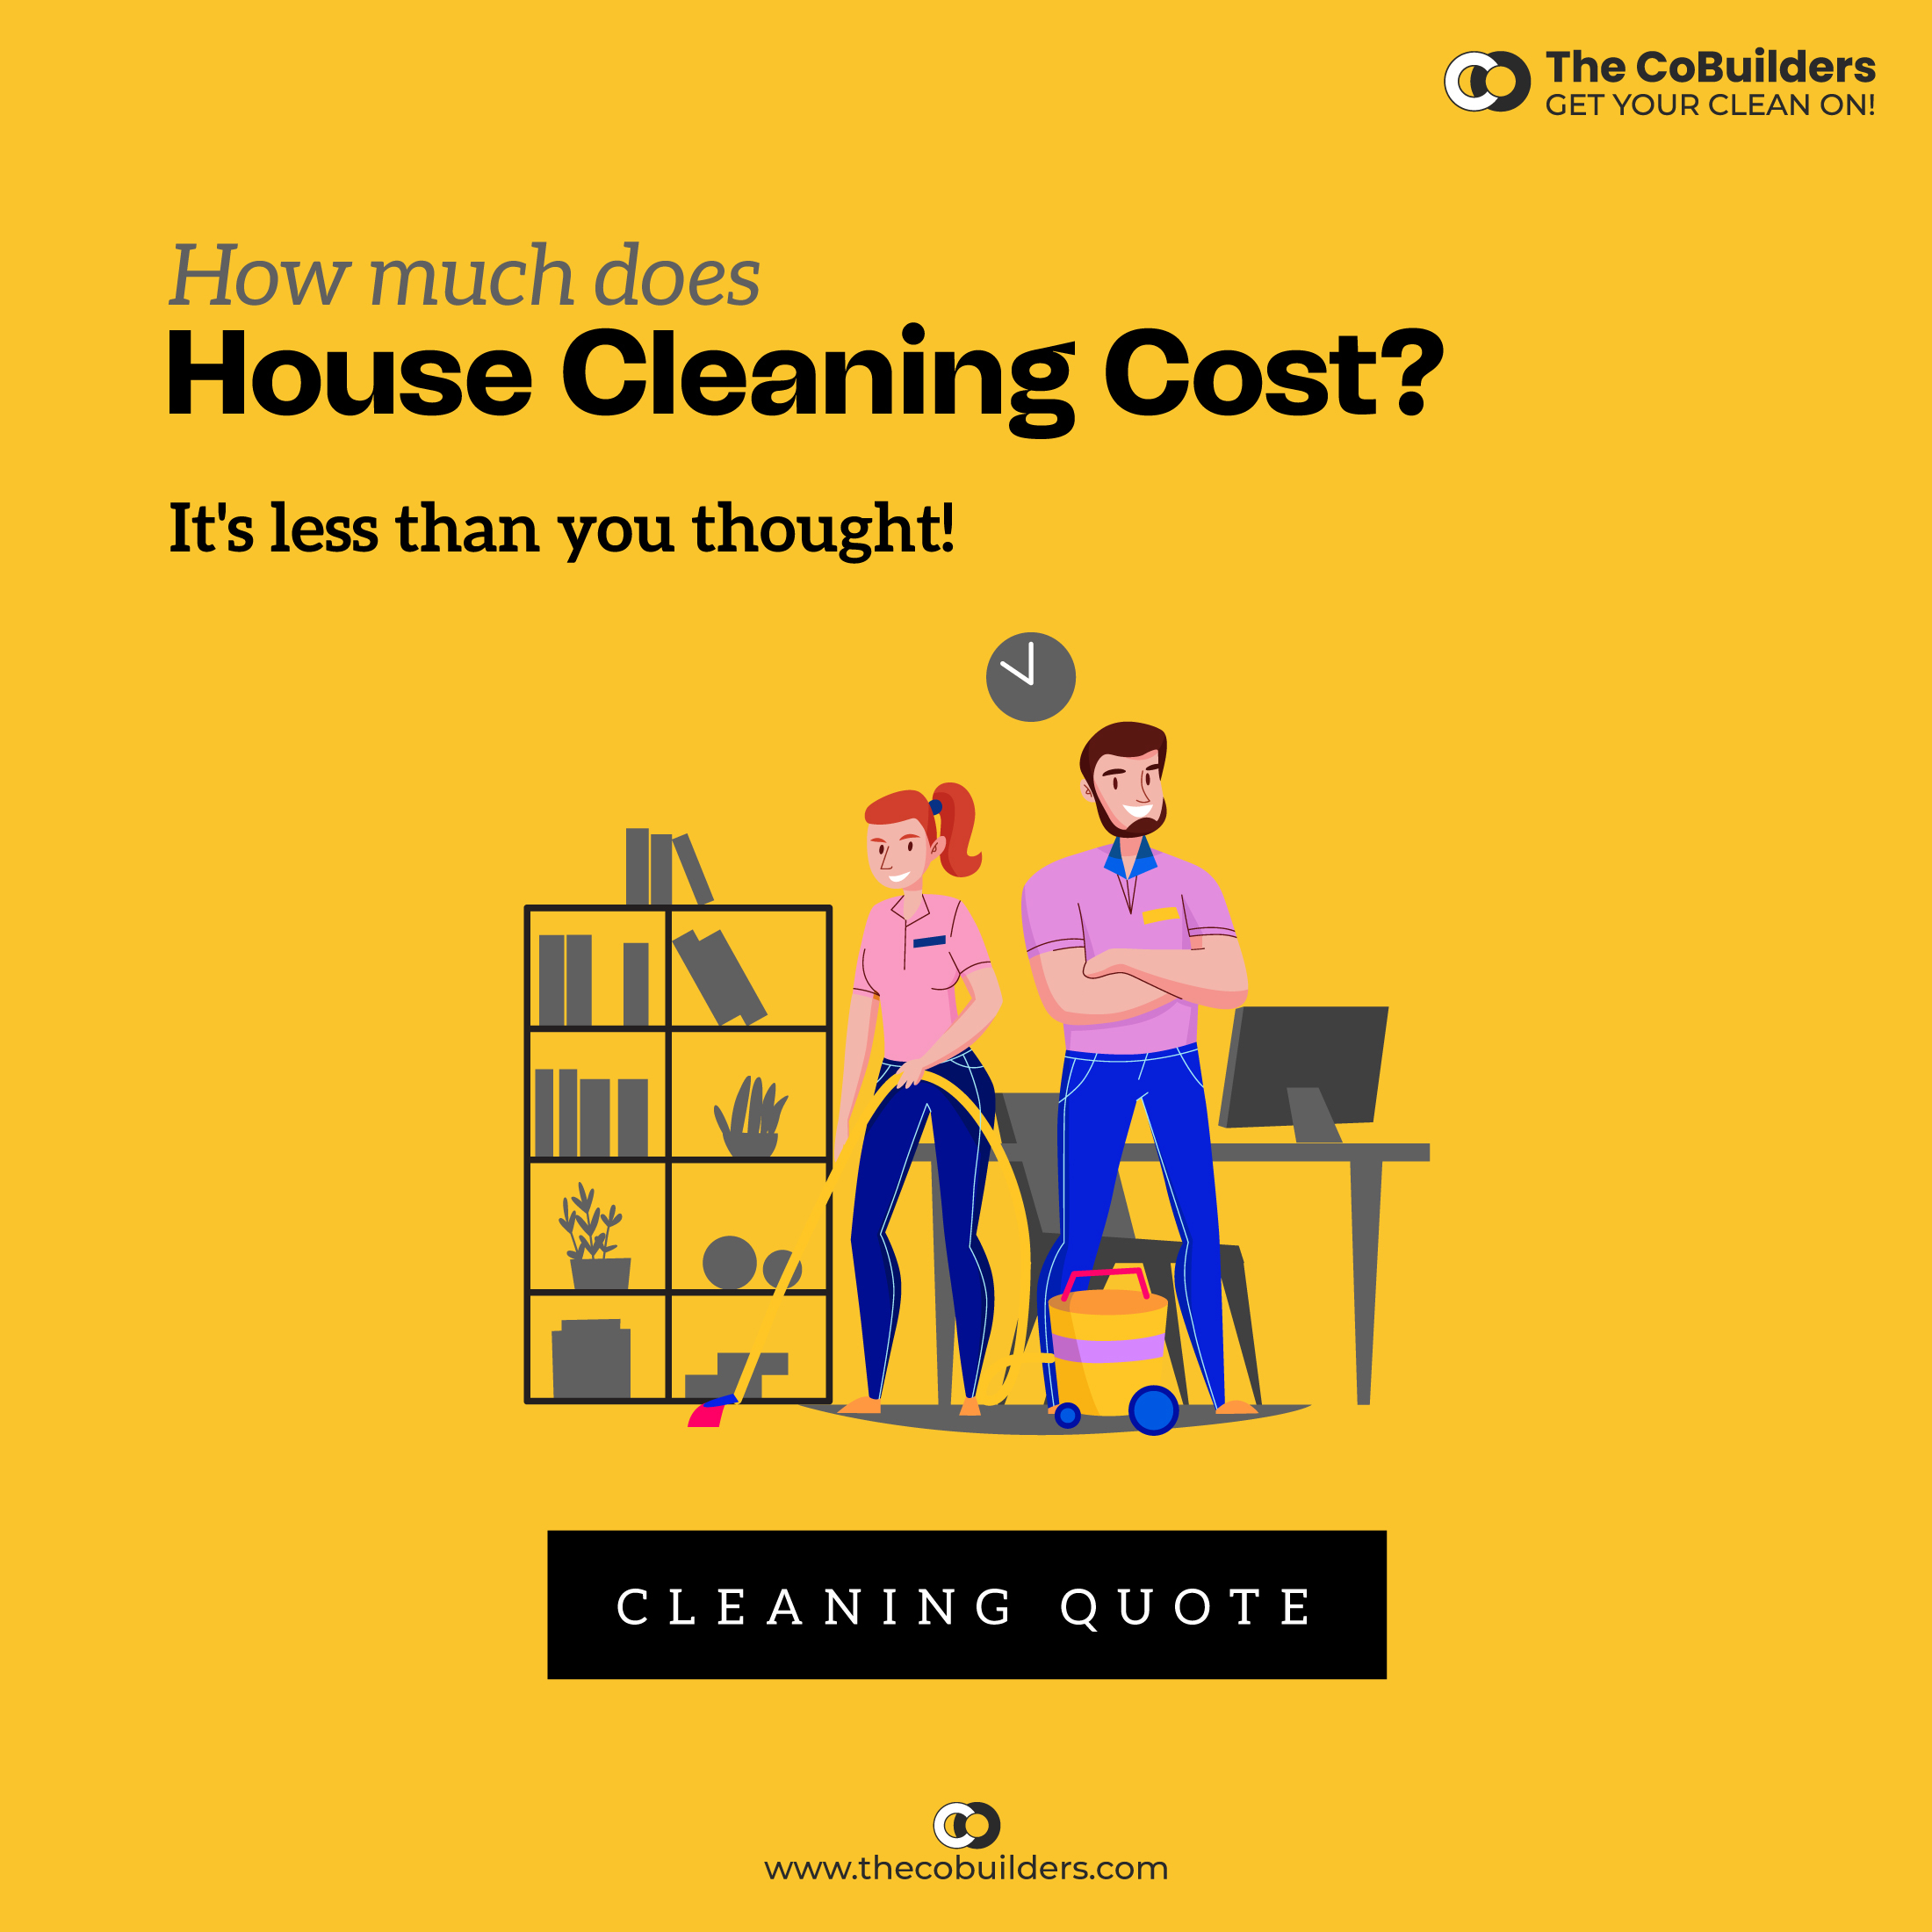 house cleaning services marketing design